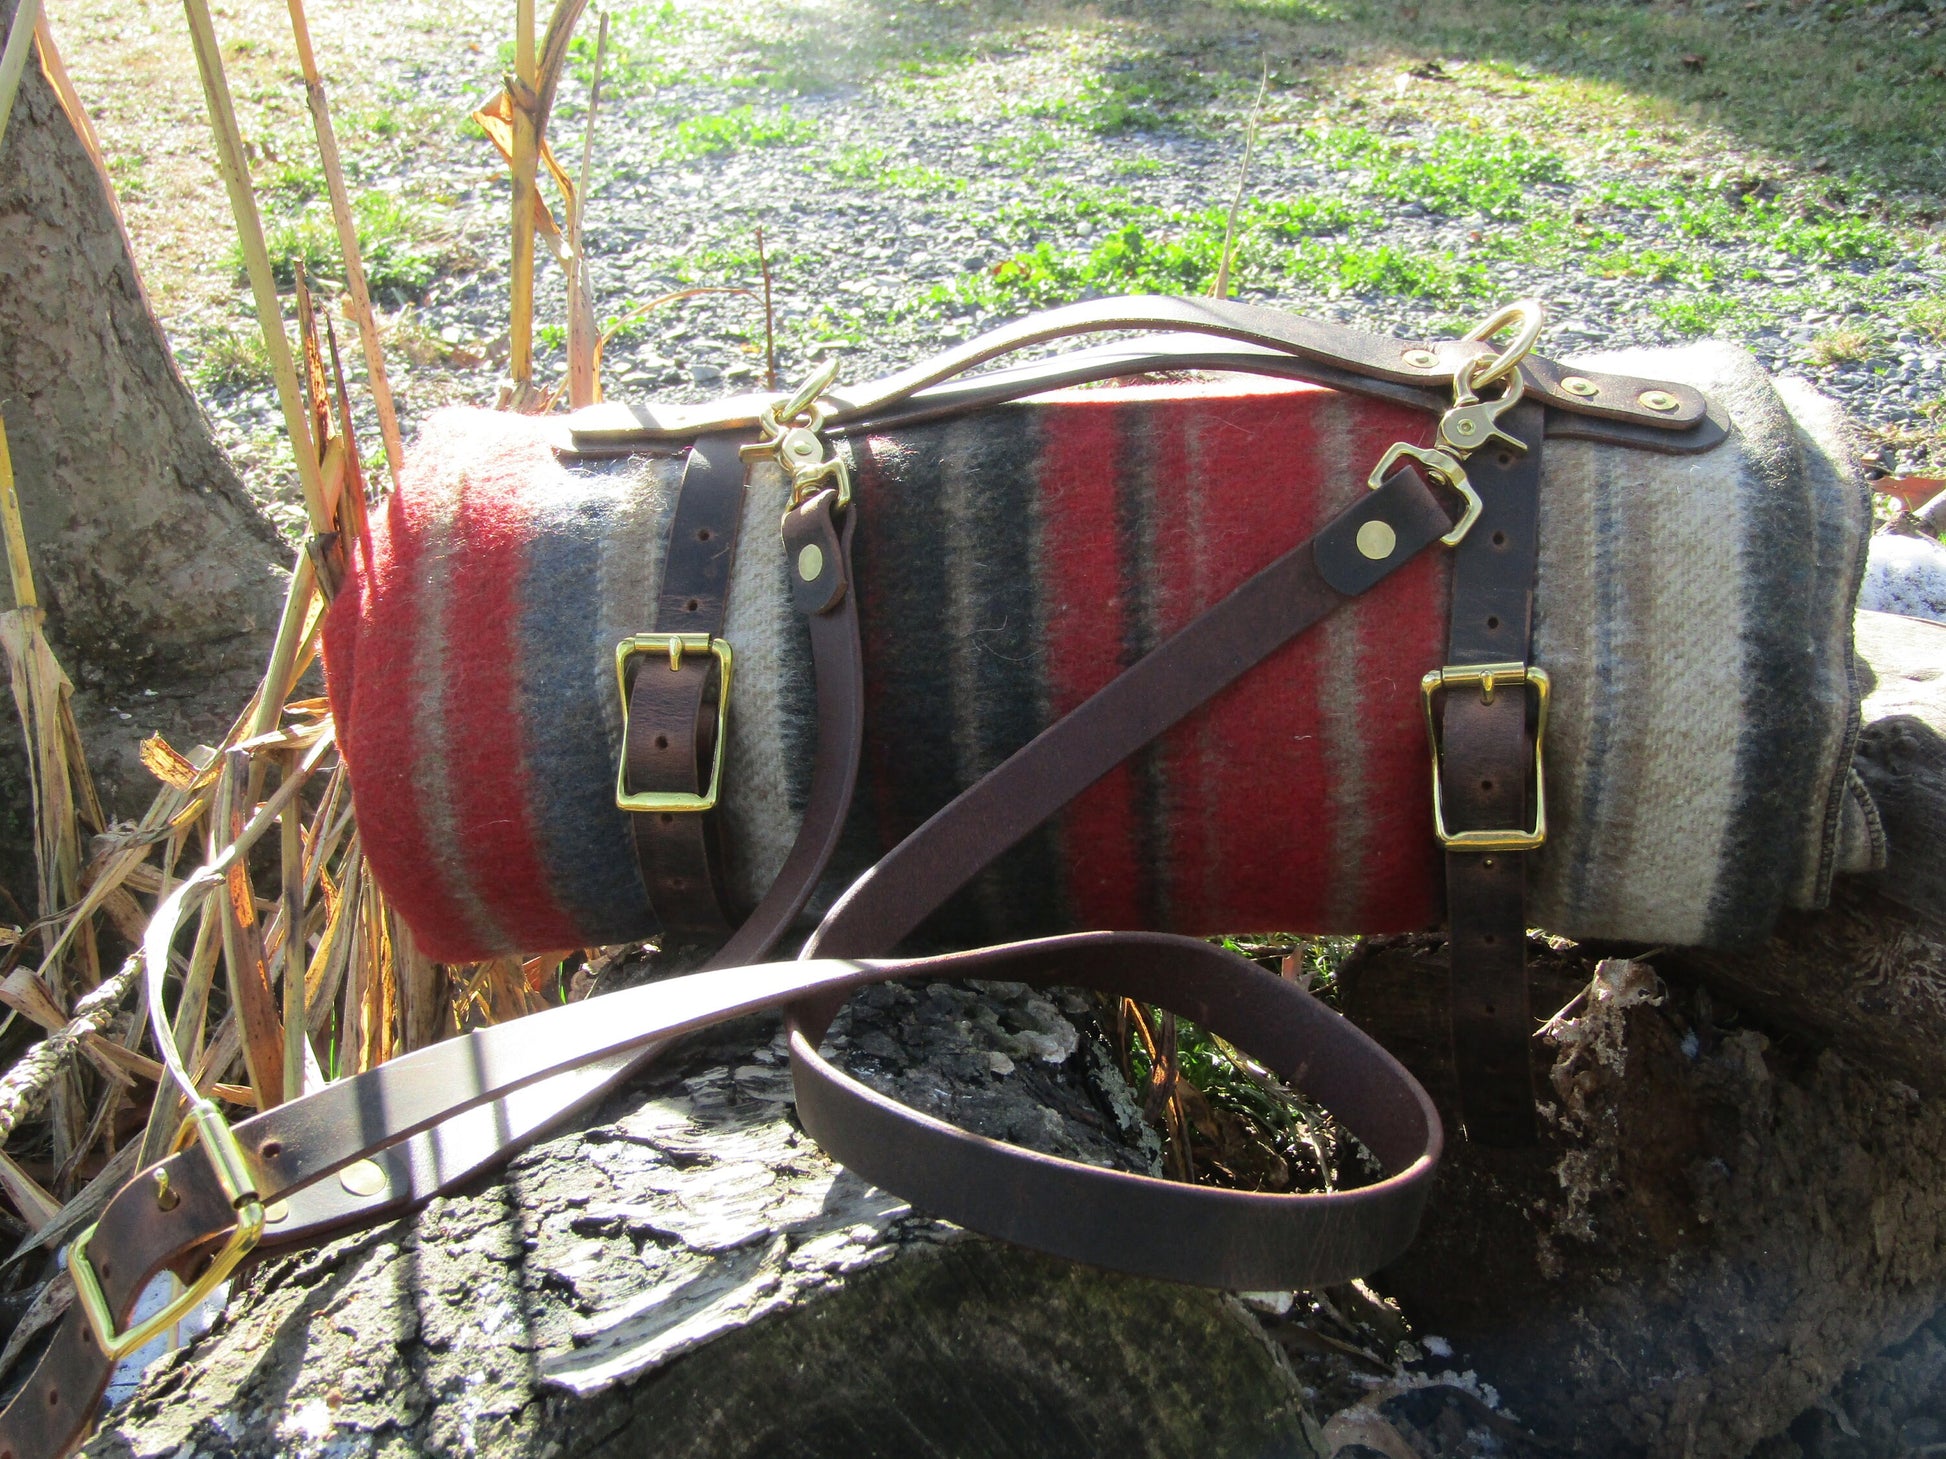 Leather Blanket Carrier